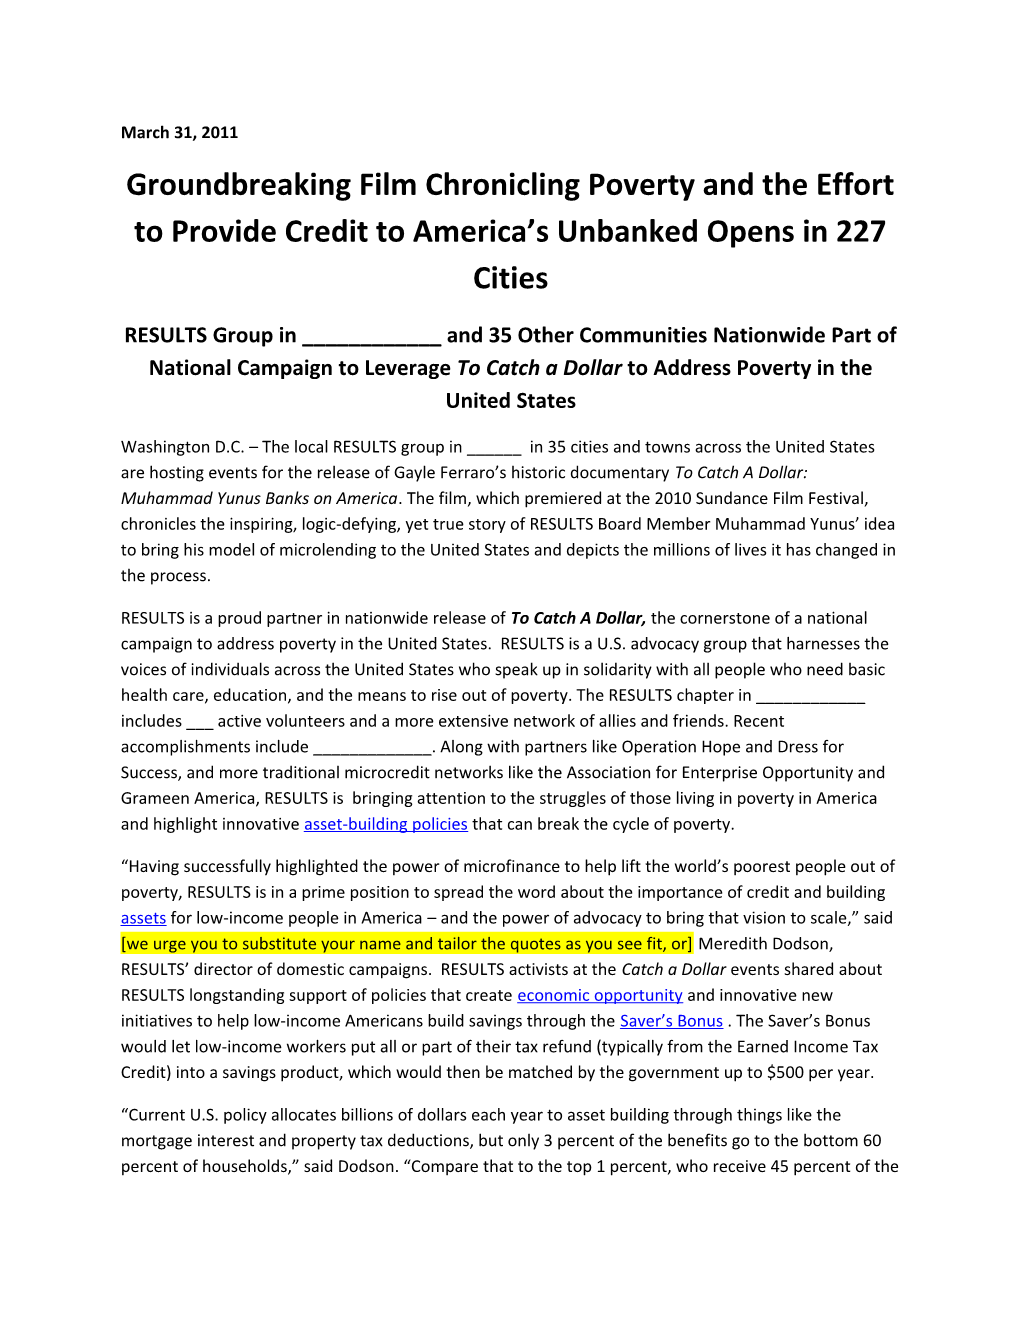 Groundbreaking Film Chronicling Poverty and the Effort to Provide Credit to America S